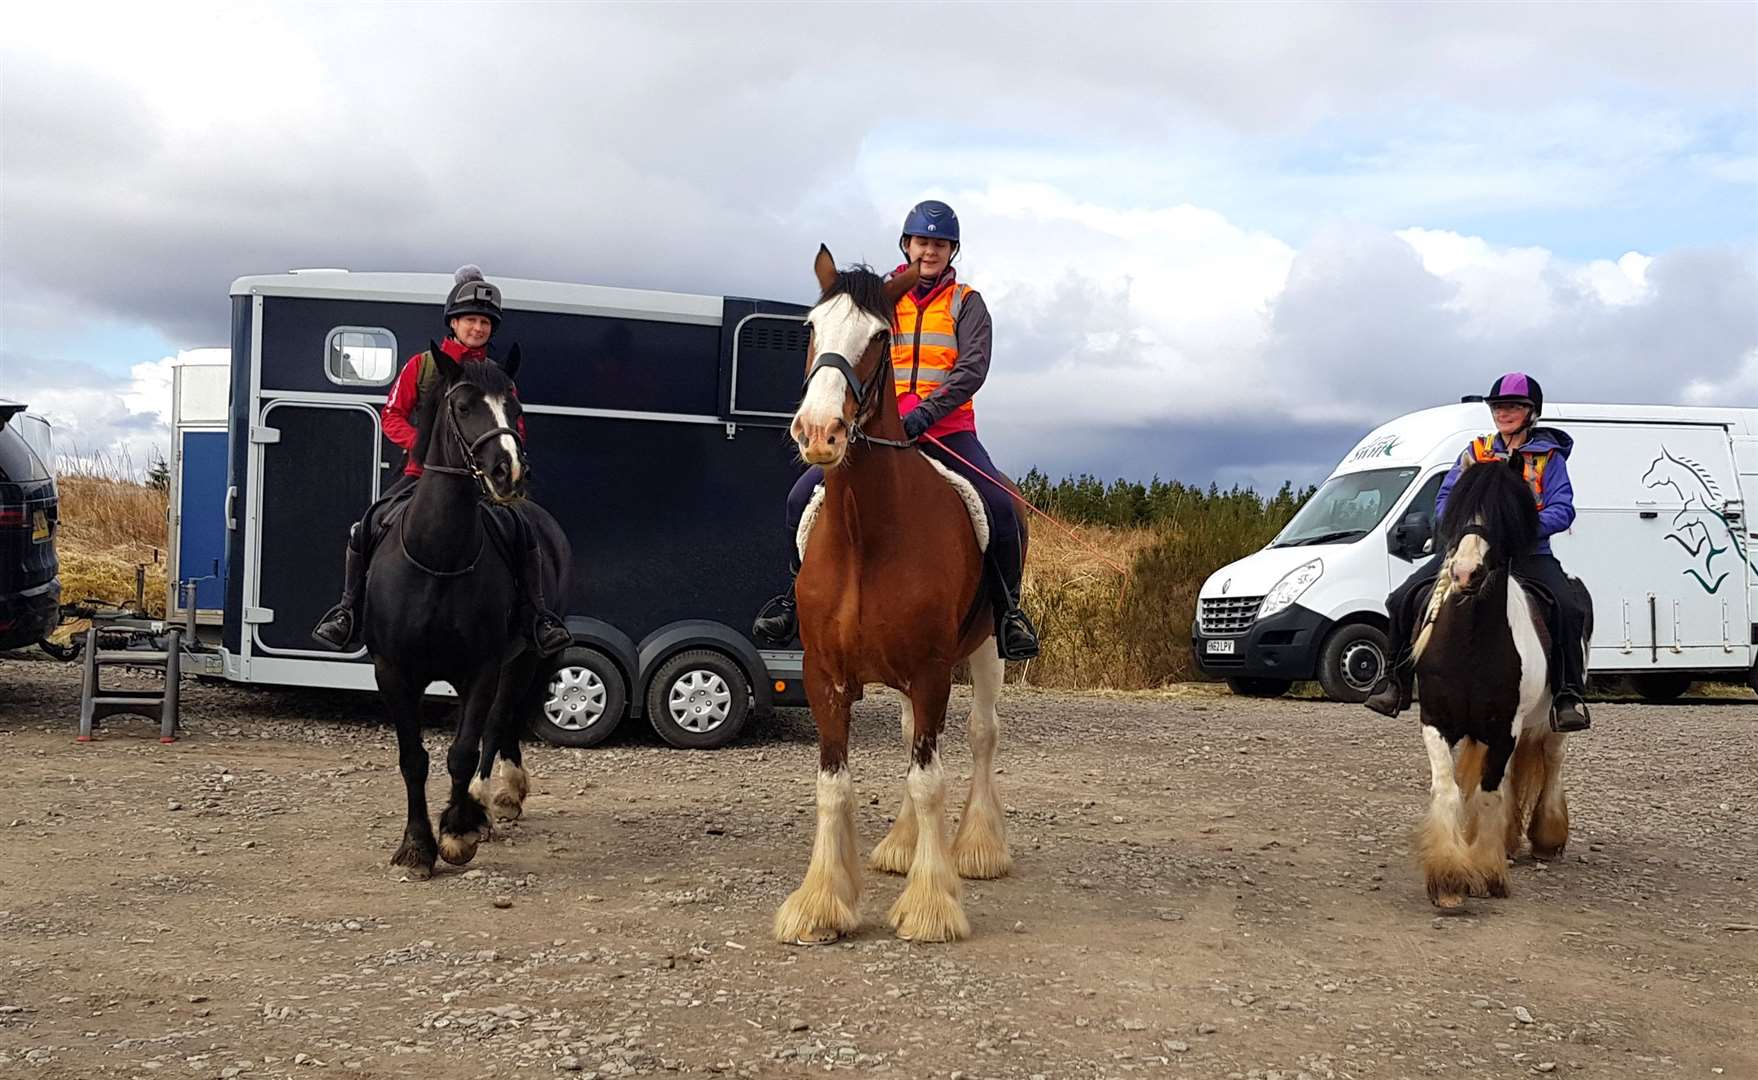 Cath Whittles and Dolly (right) prepare to set out on the Memory Ride along with Jane McDonough and Fudge (left) and Sharon Hepburn and her Clydesdale Hamish.